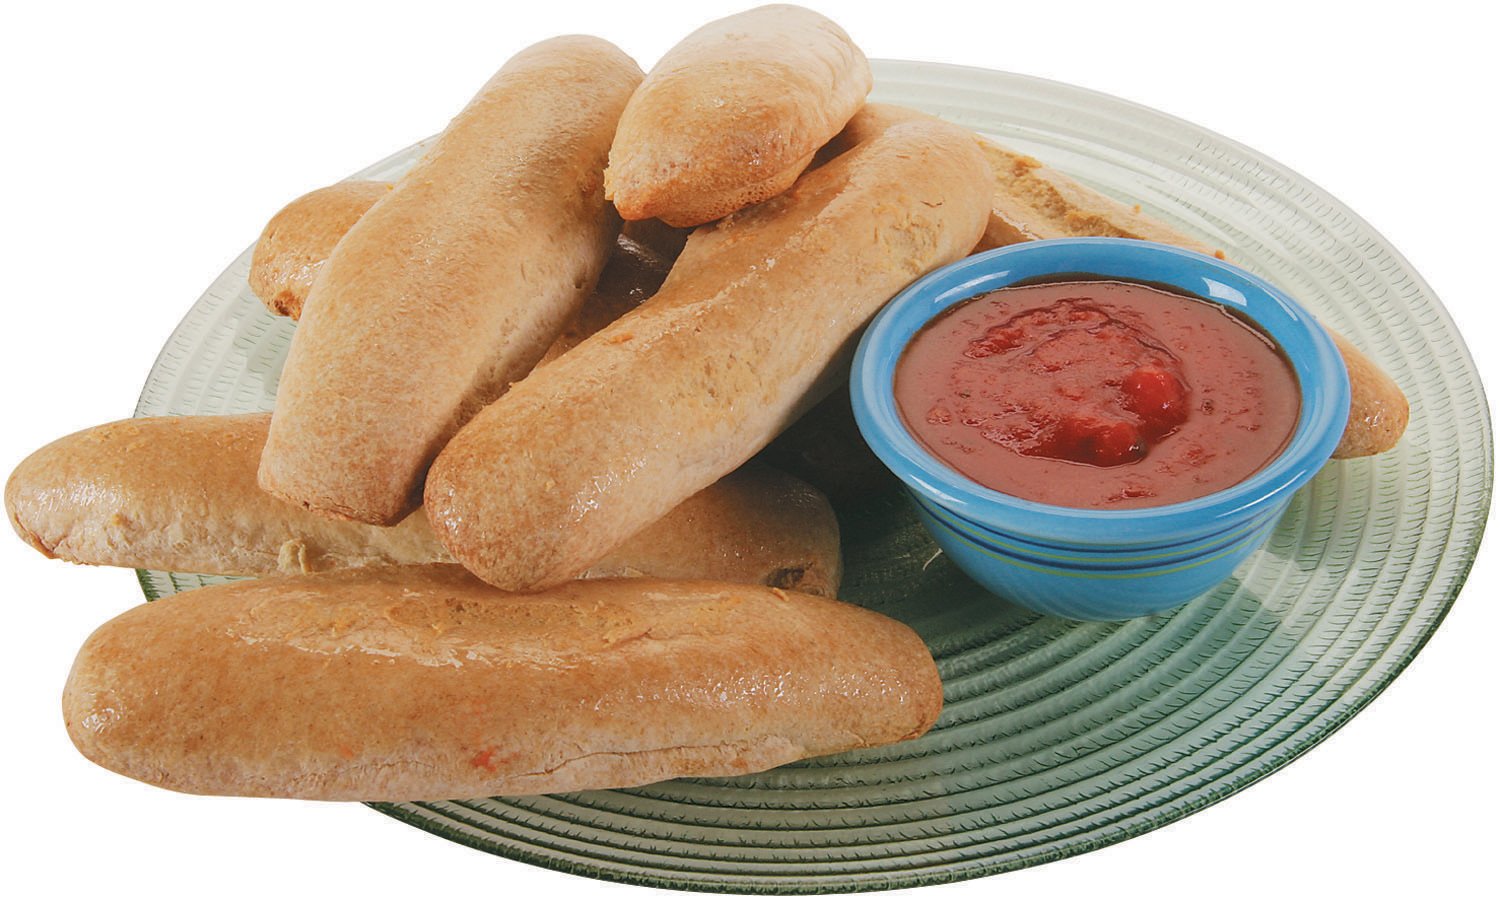 Bread Sticks with Marinara Sauce on a Plate Food Picture